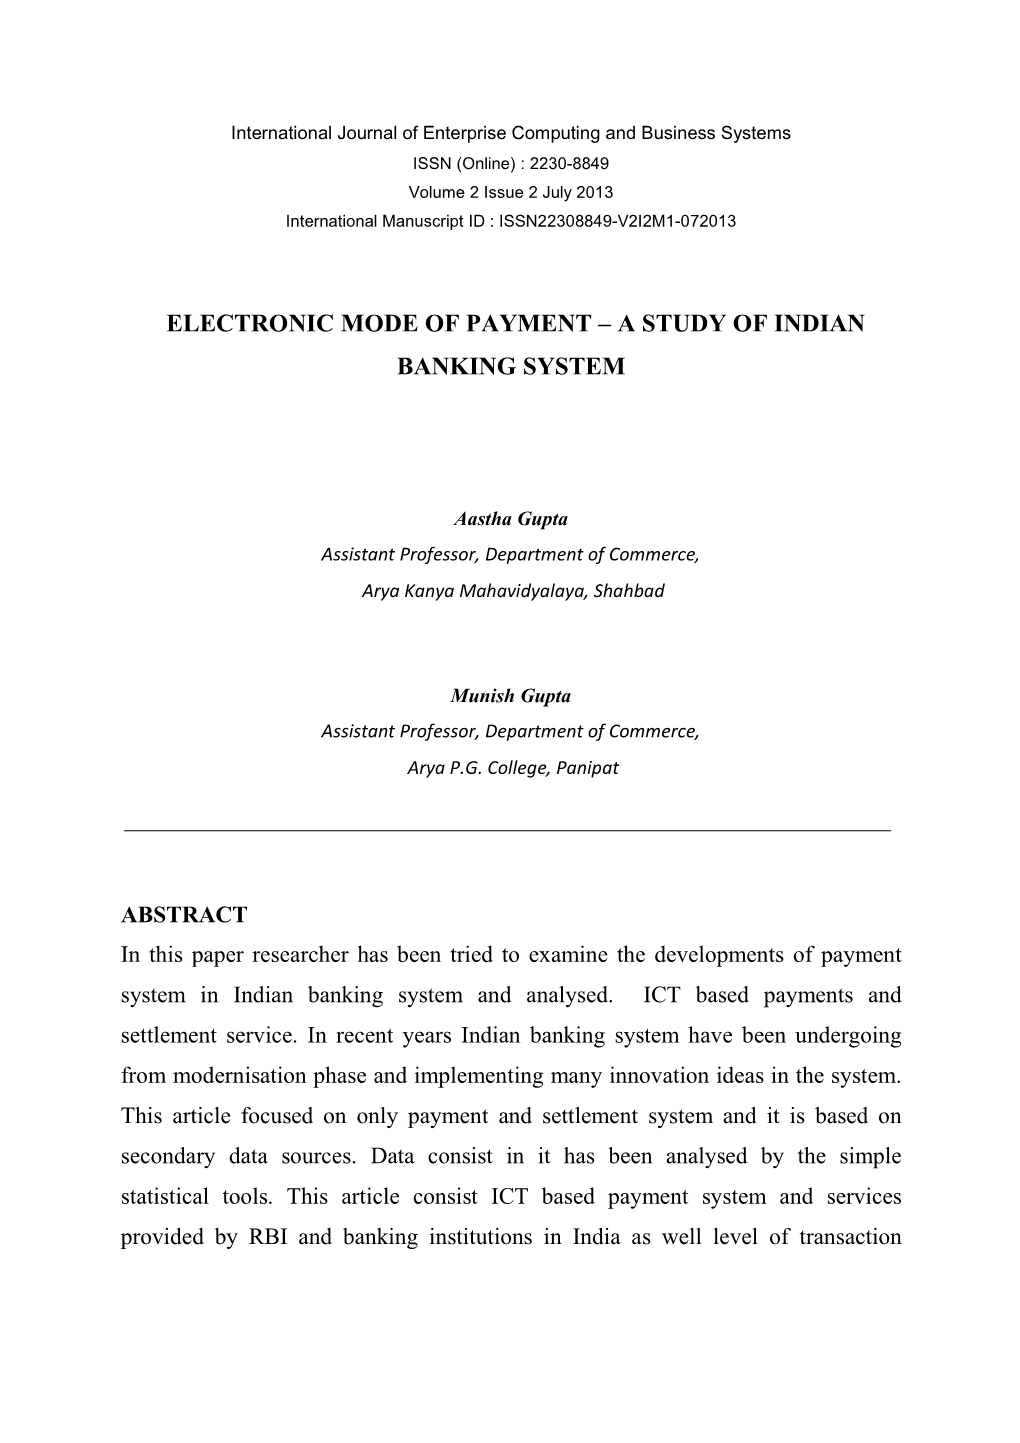 Electronic Mode of Payment – a Study of Indian Banking